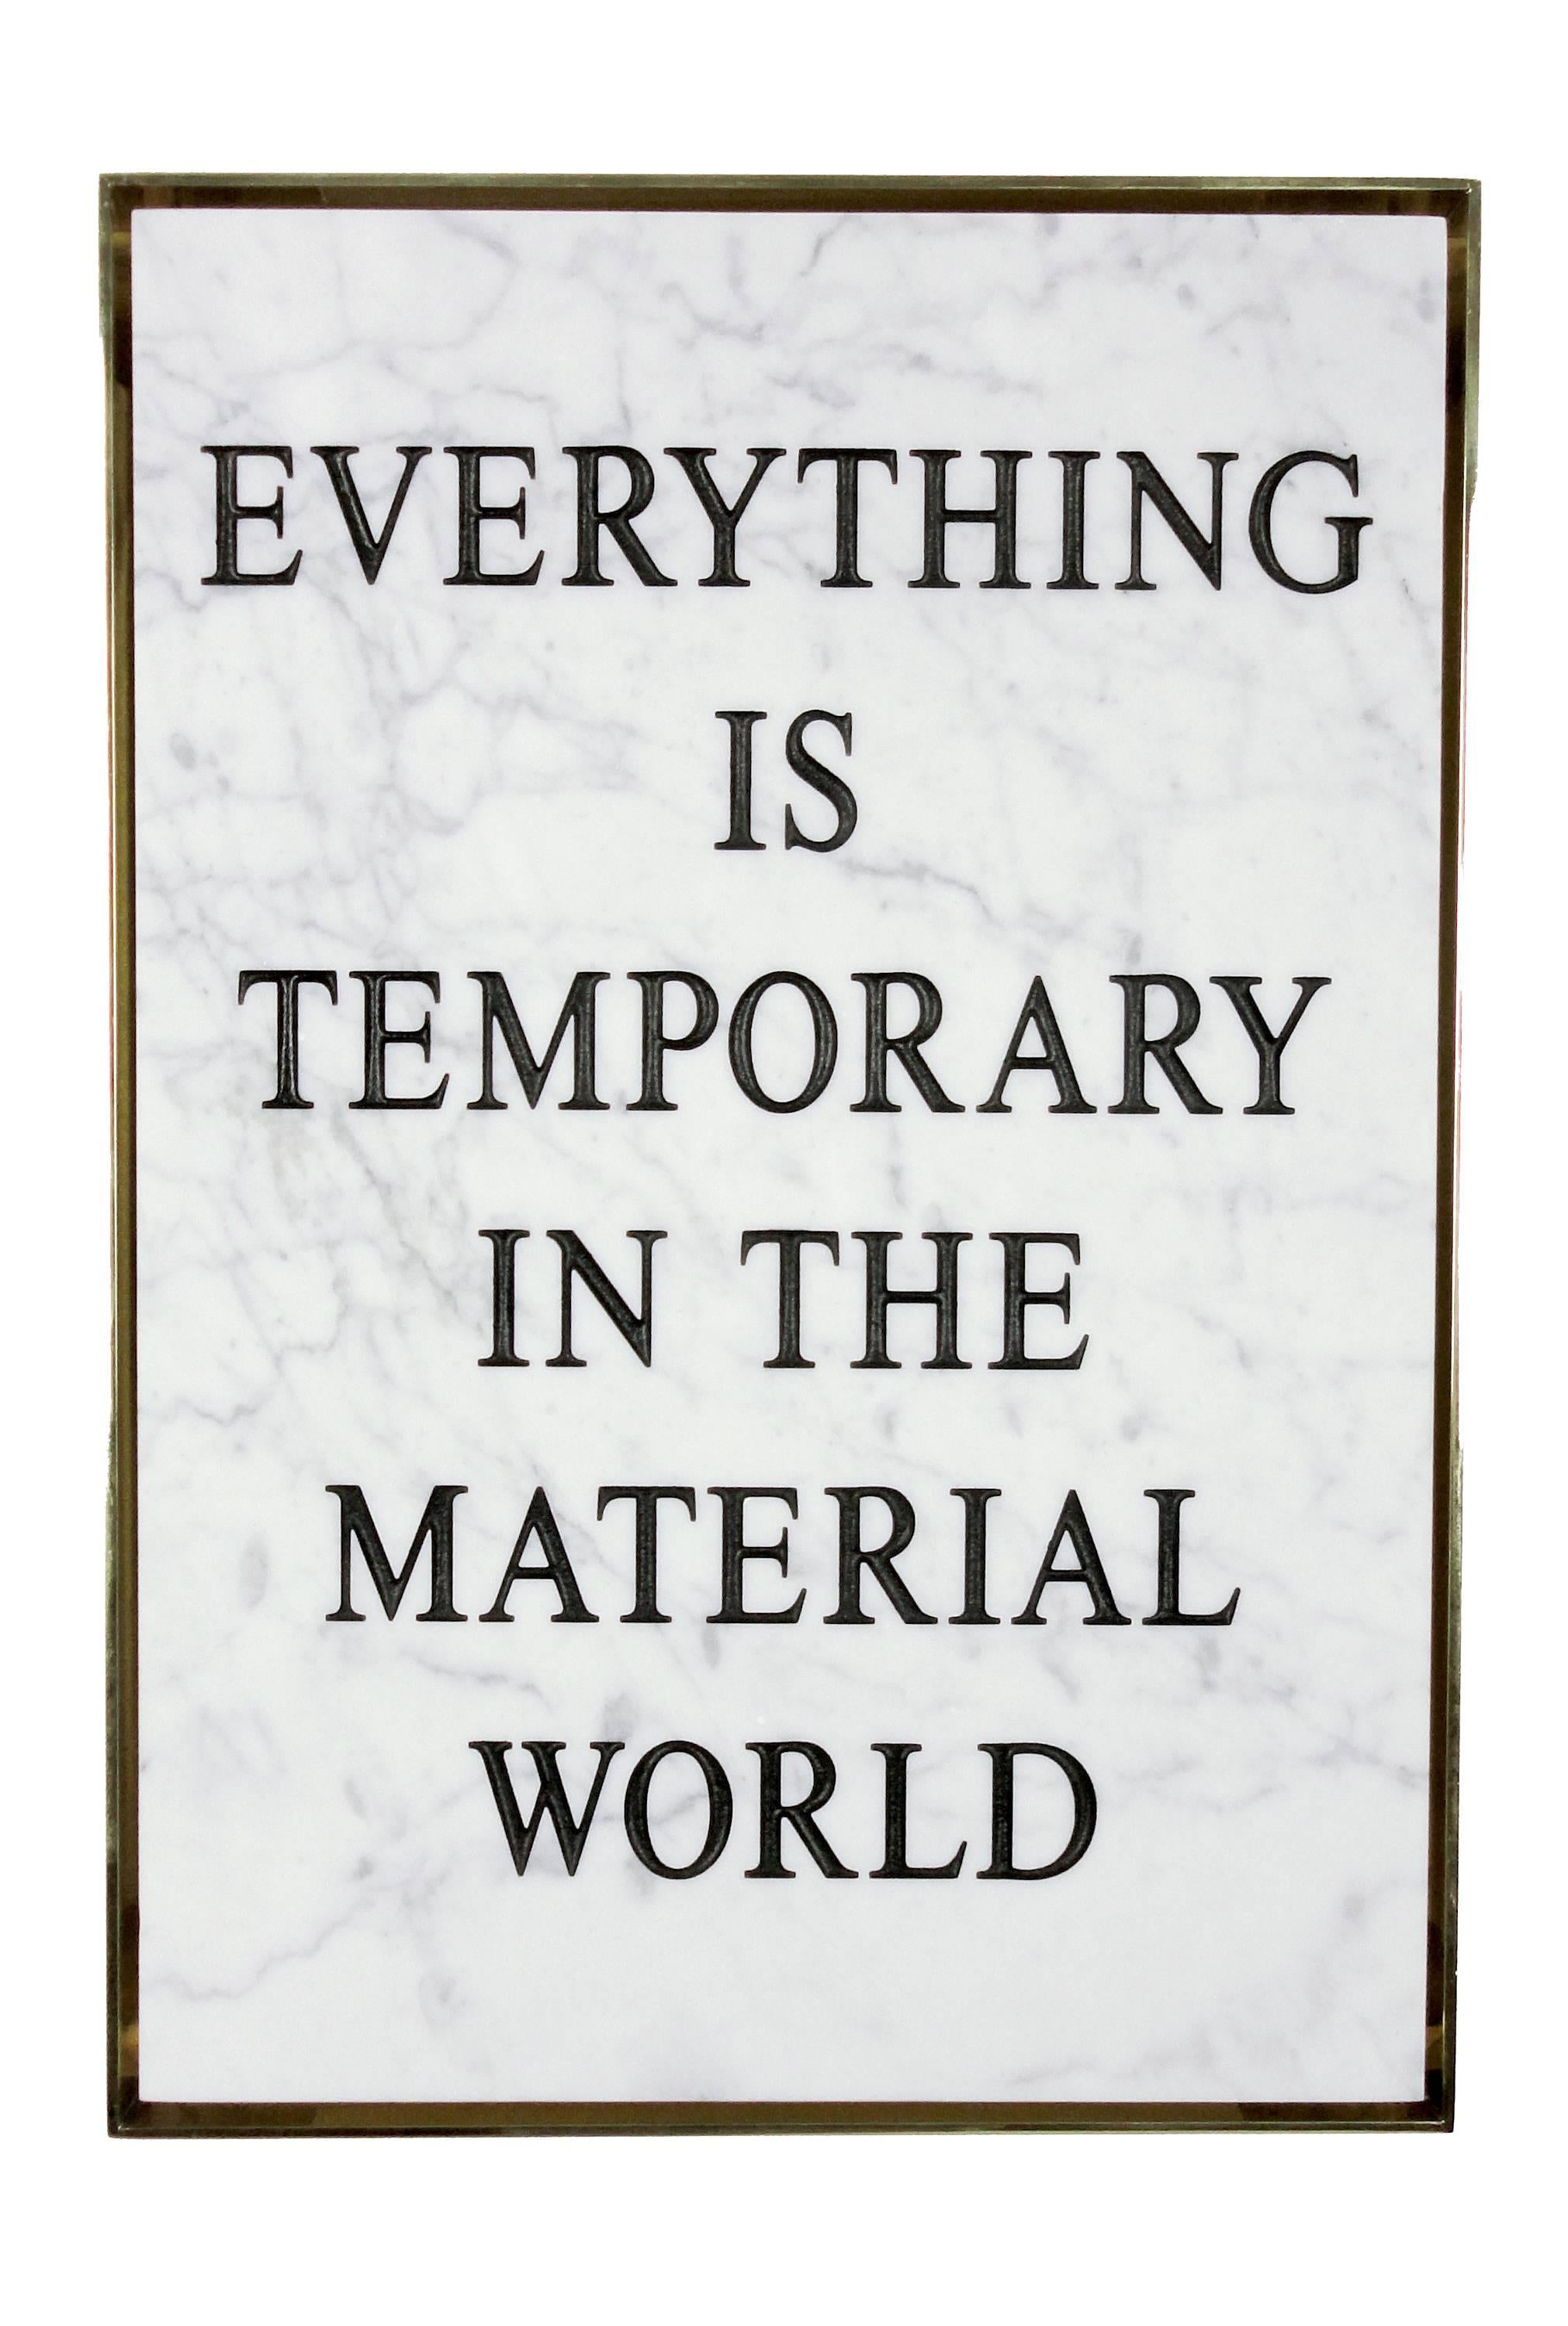 Everything Is Temporary in the Material World - Art by Nimai Kesten